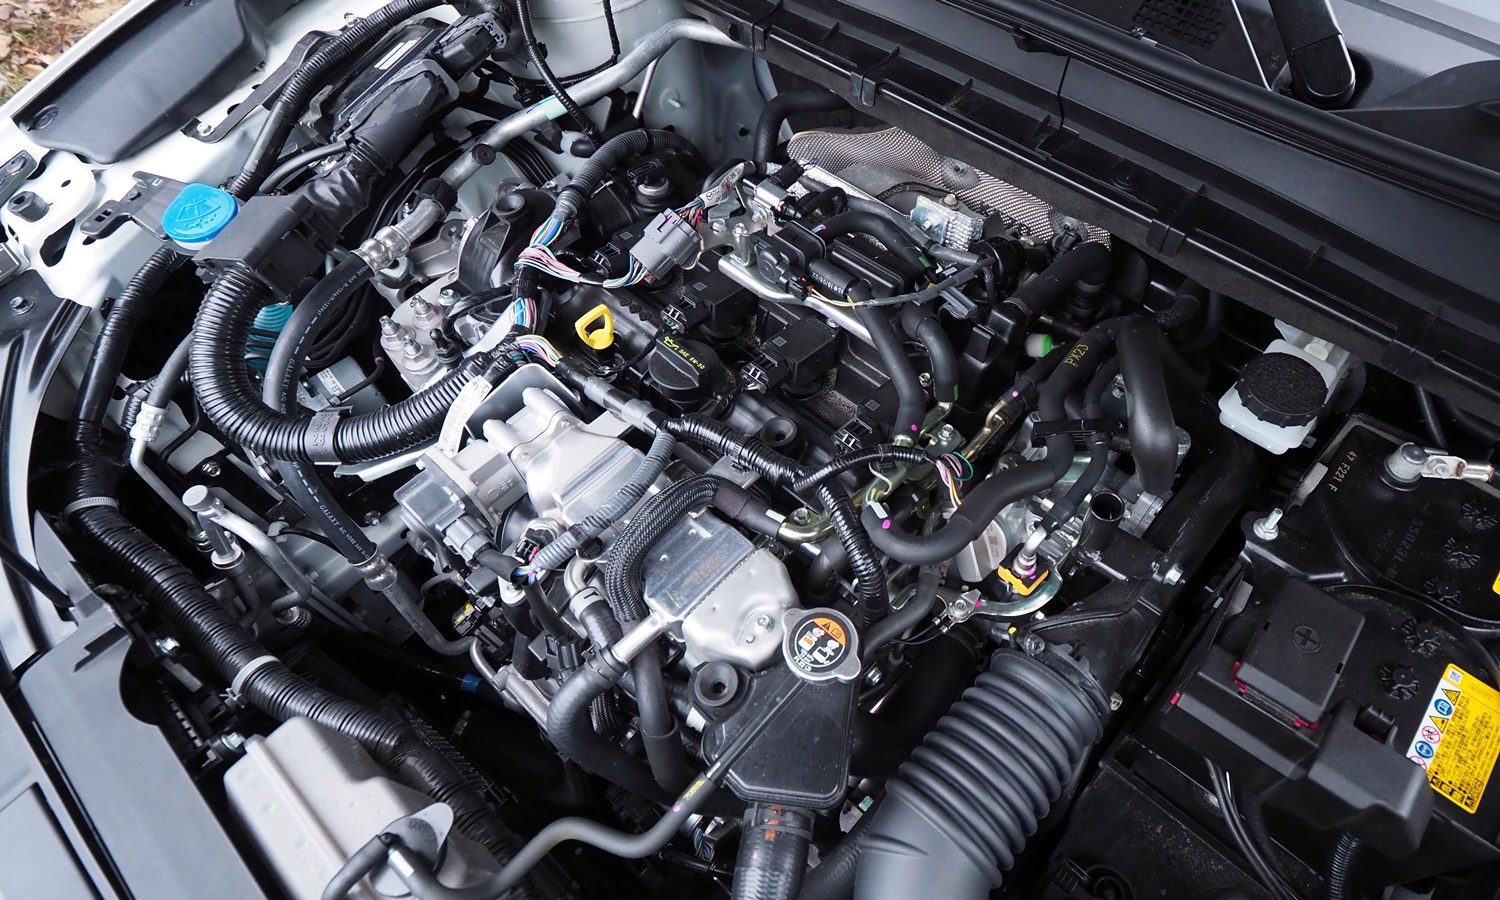 CX-5 Reviews: Mazda CX-5 engine uncovered